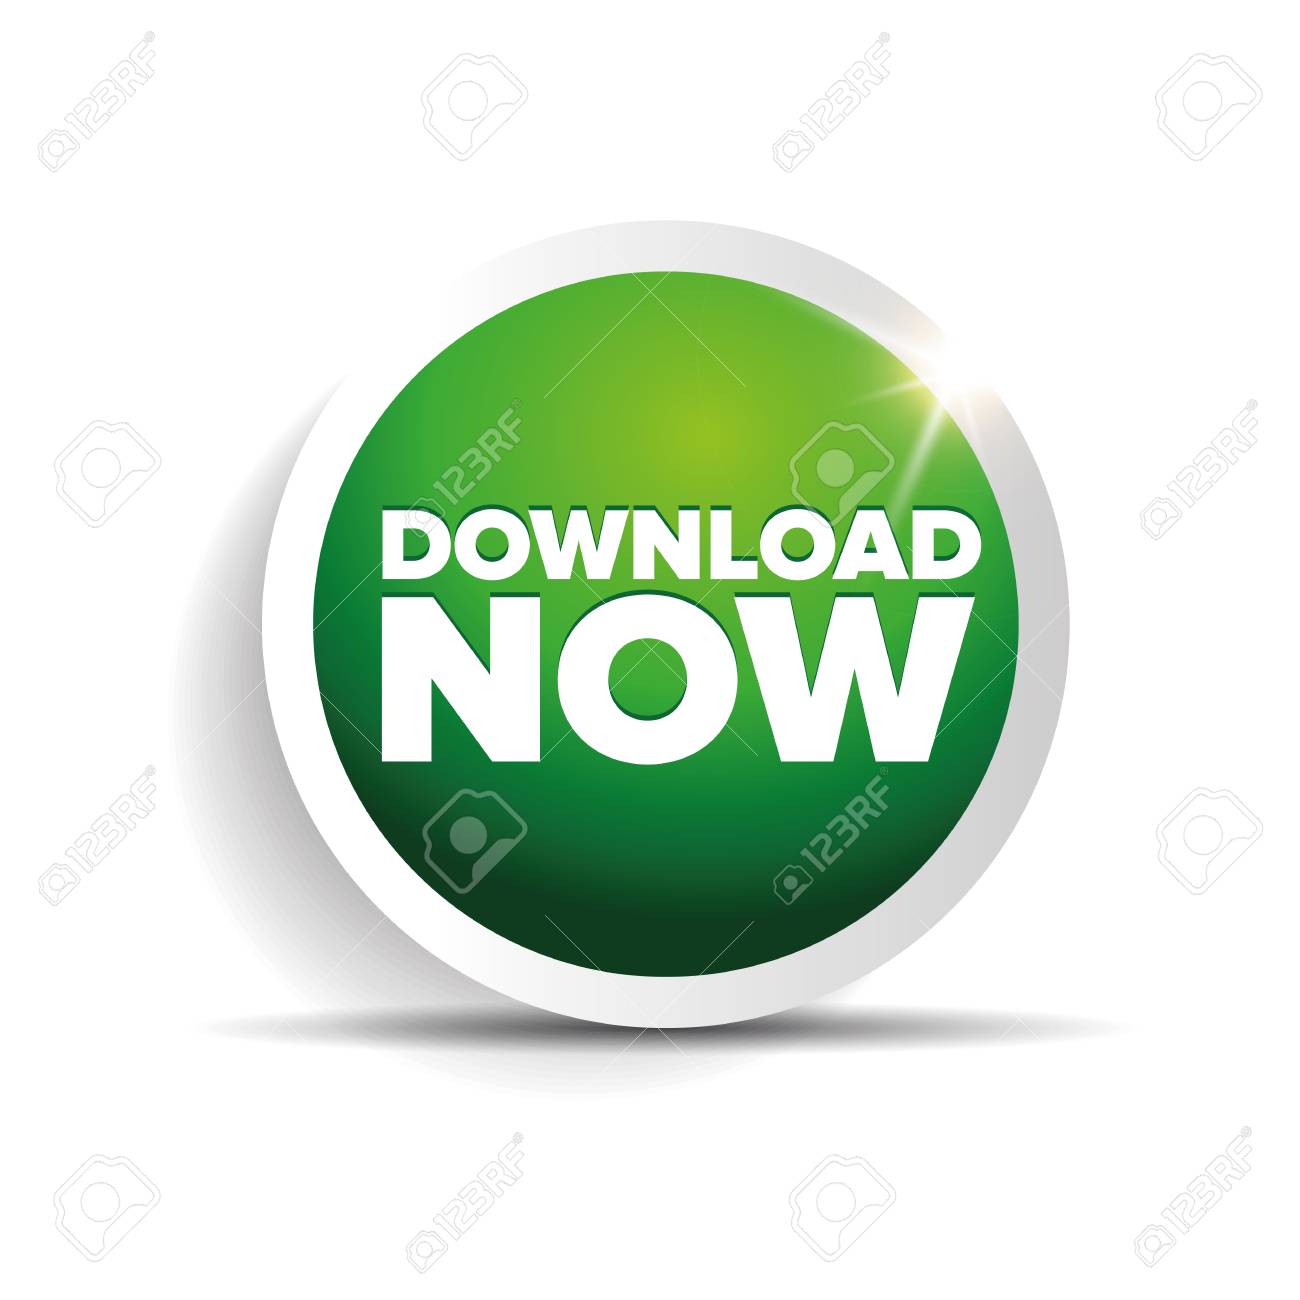 Download now button with shine Stock Vector - 37054993